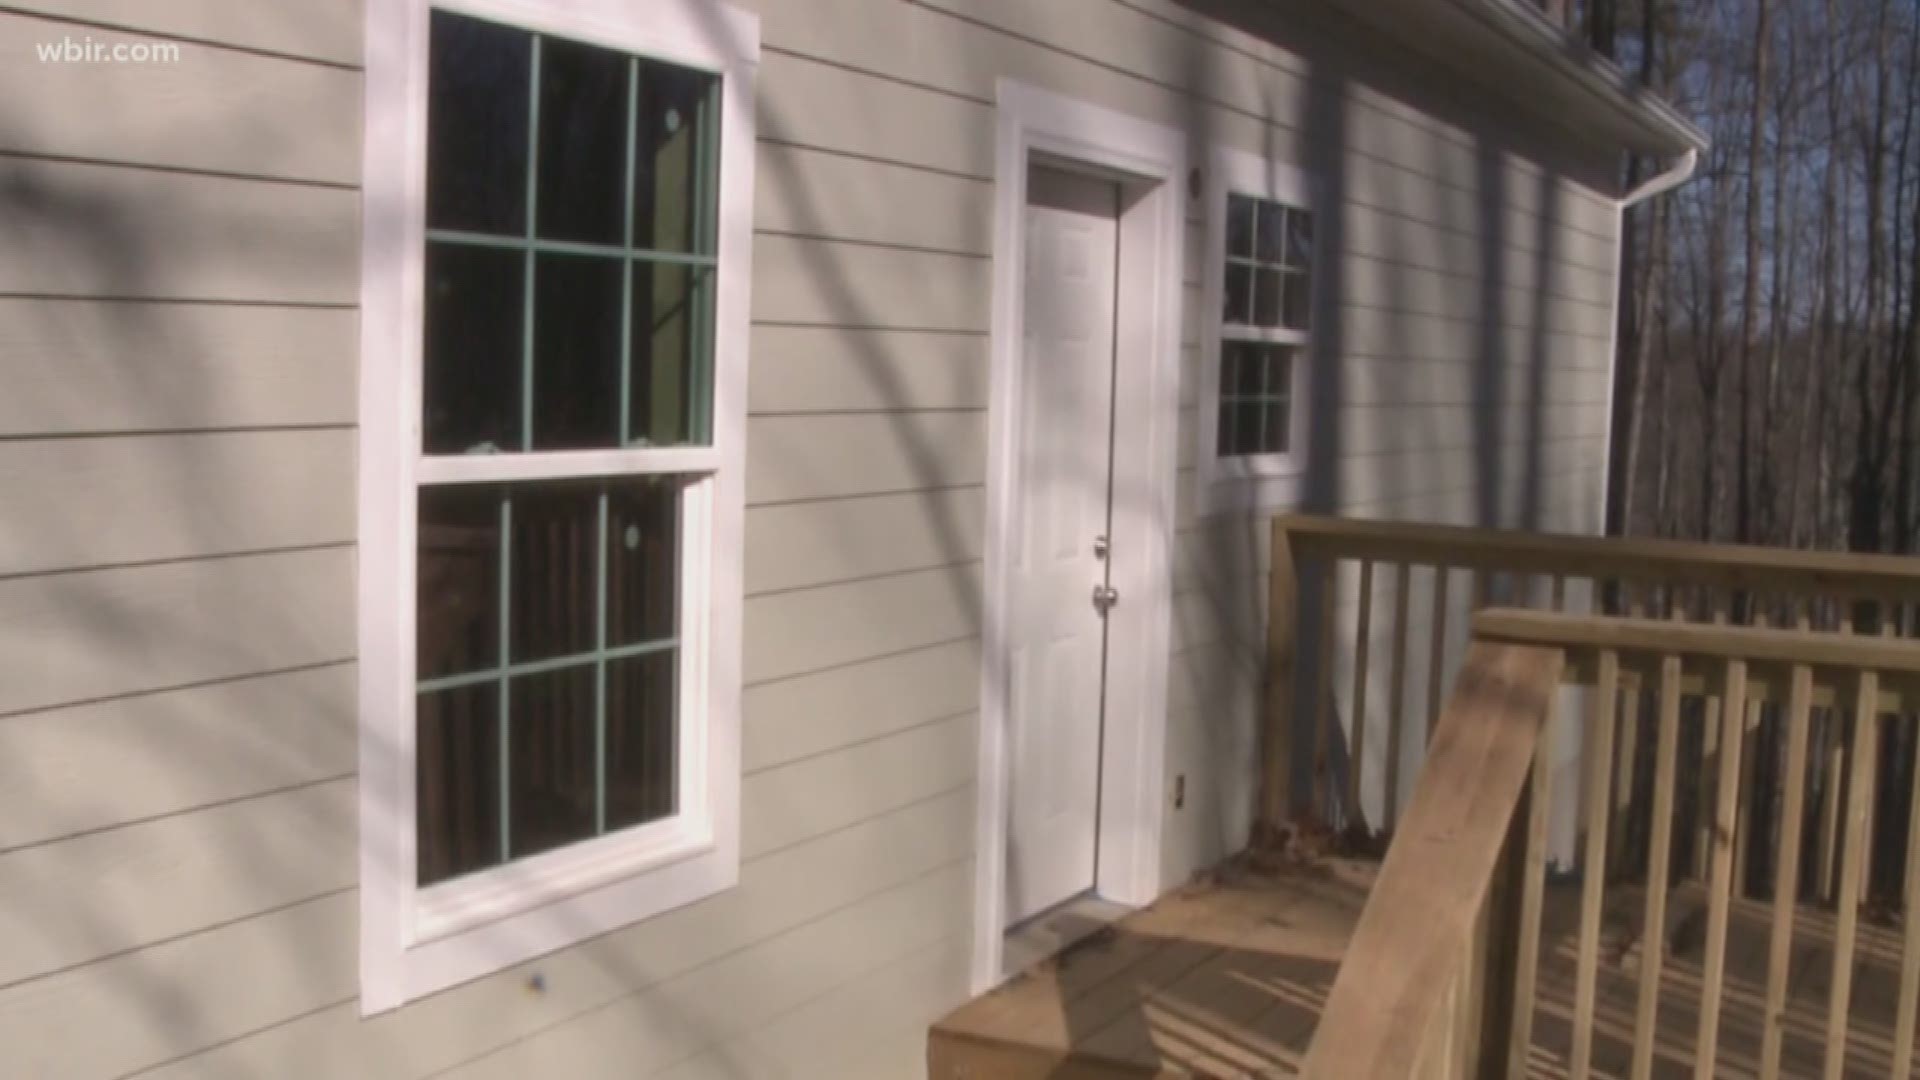 A local group continues to improve and rebuild homes in the wake of the fires.